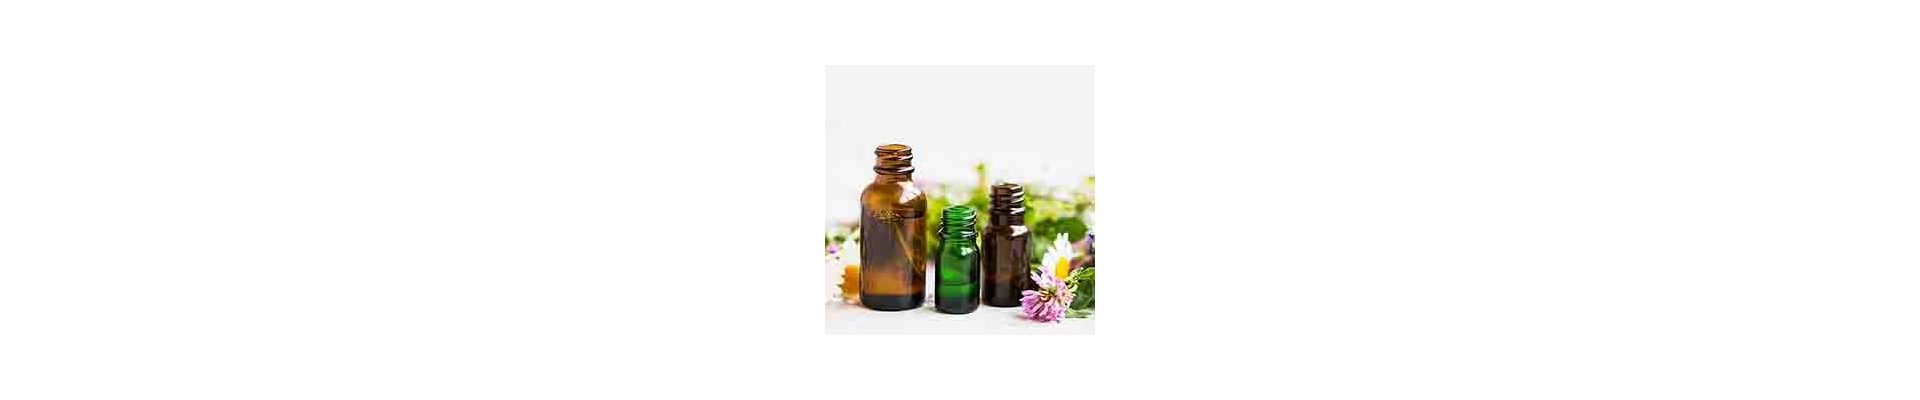 Essential Oils for Cosmetics & Toiletries | The Soap Kitchen™